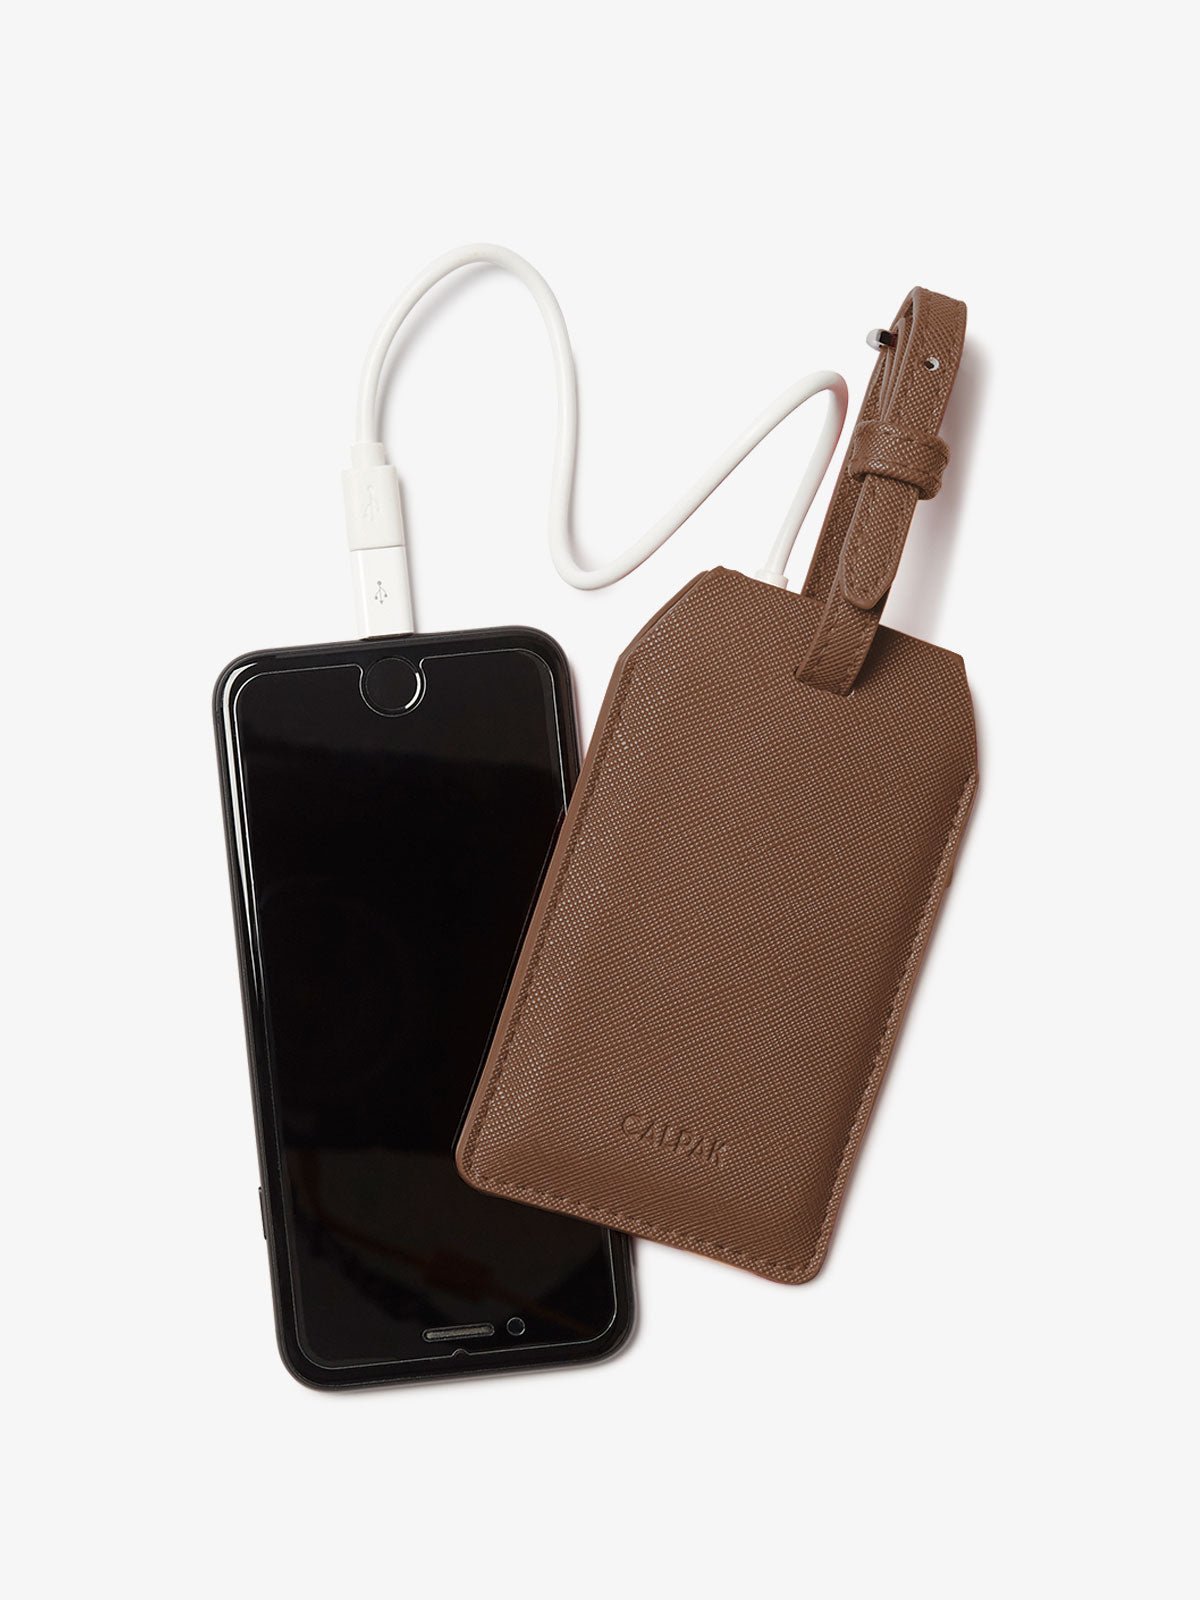 CALPAK luggage tag charger 2000mh in brown mocha